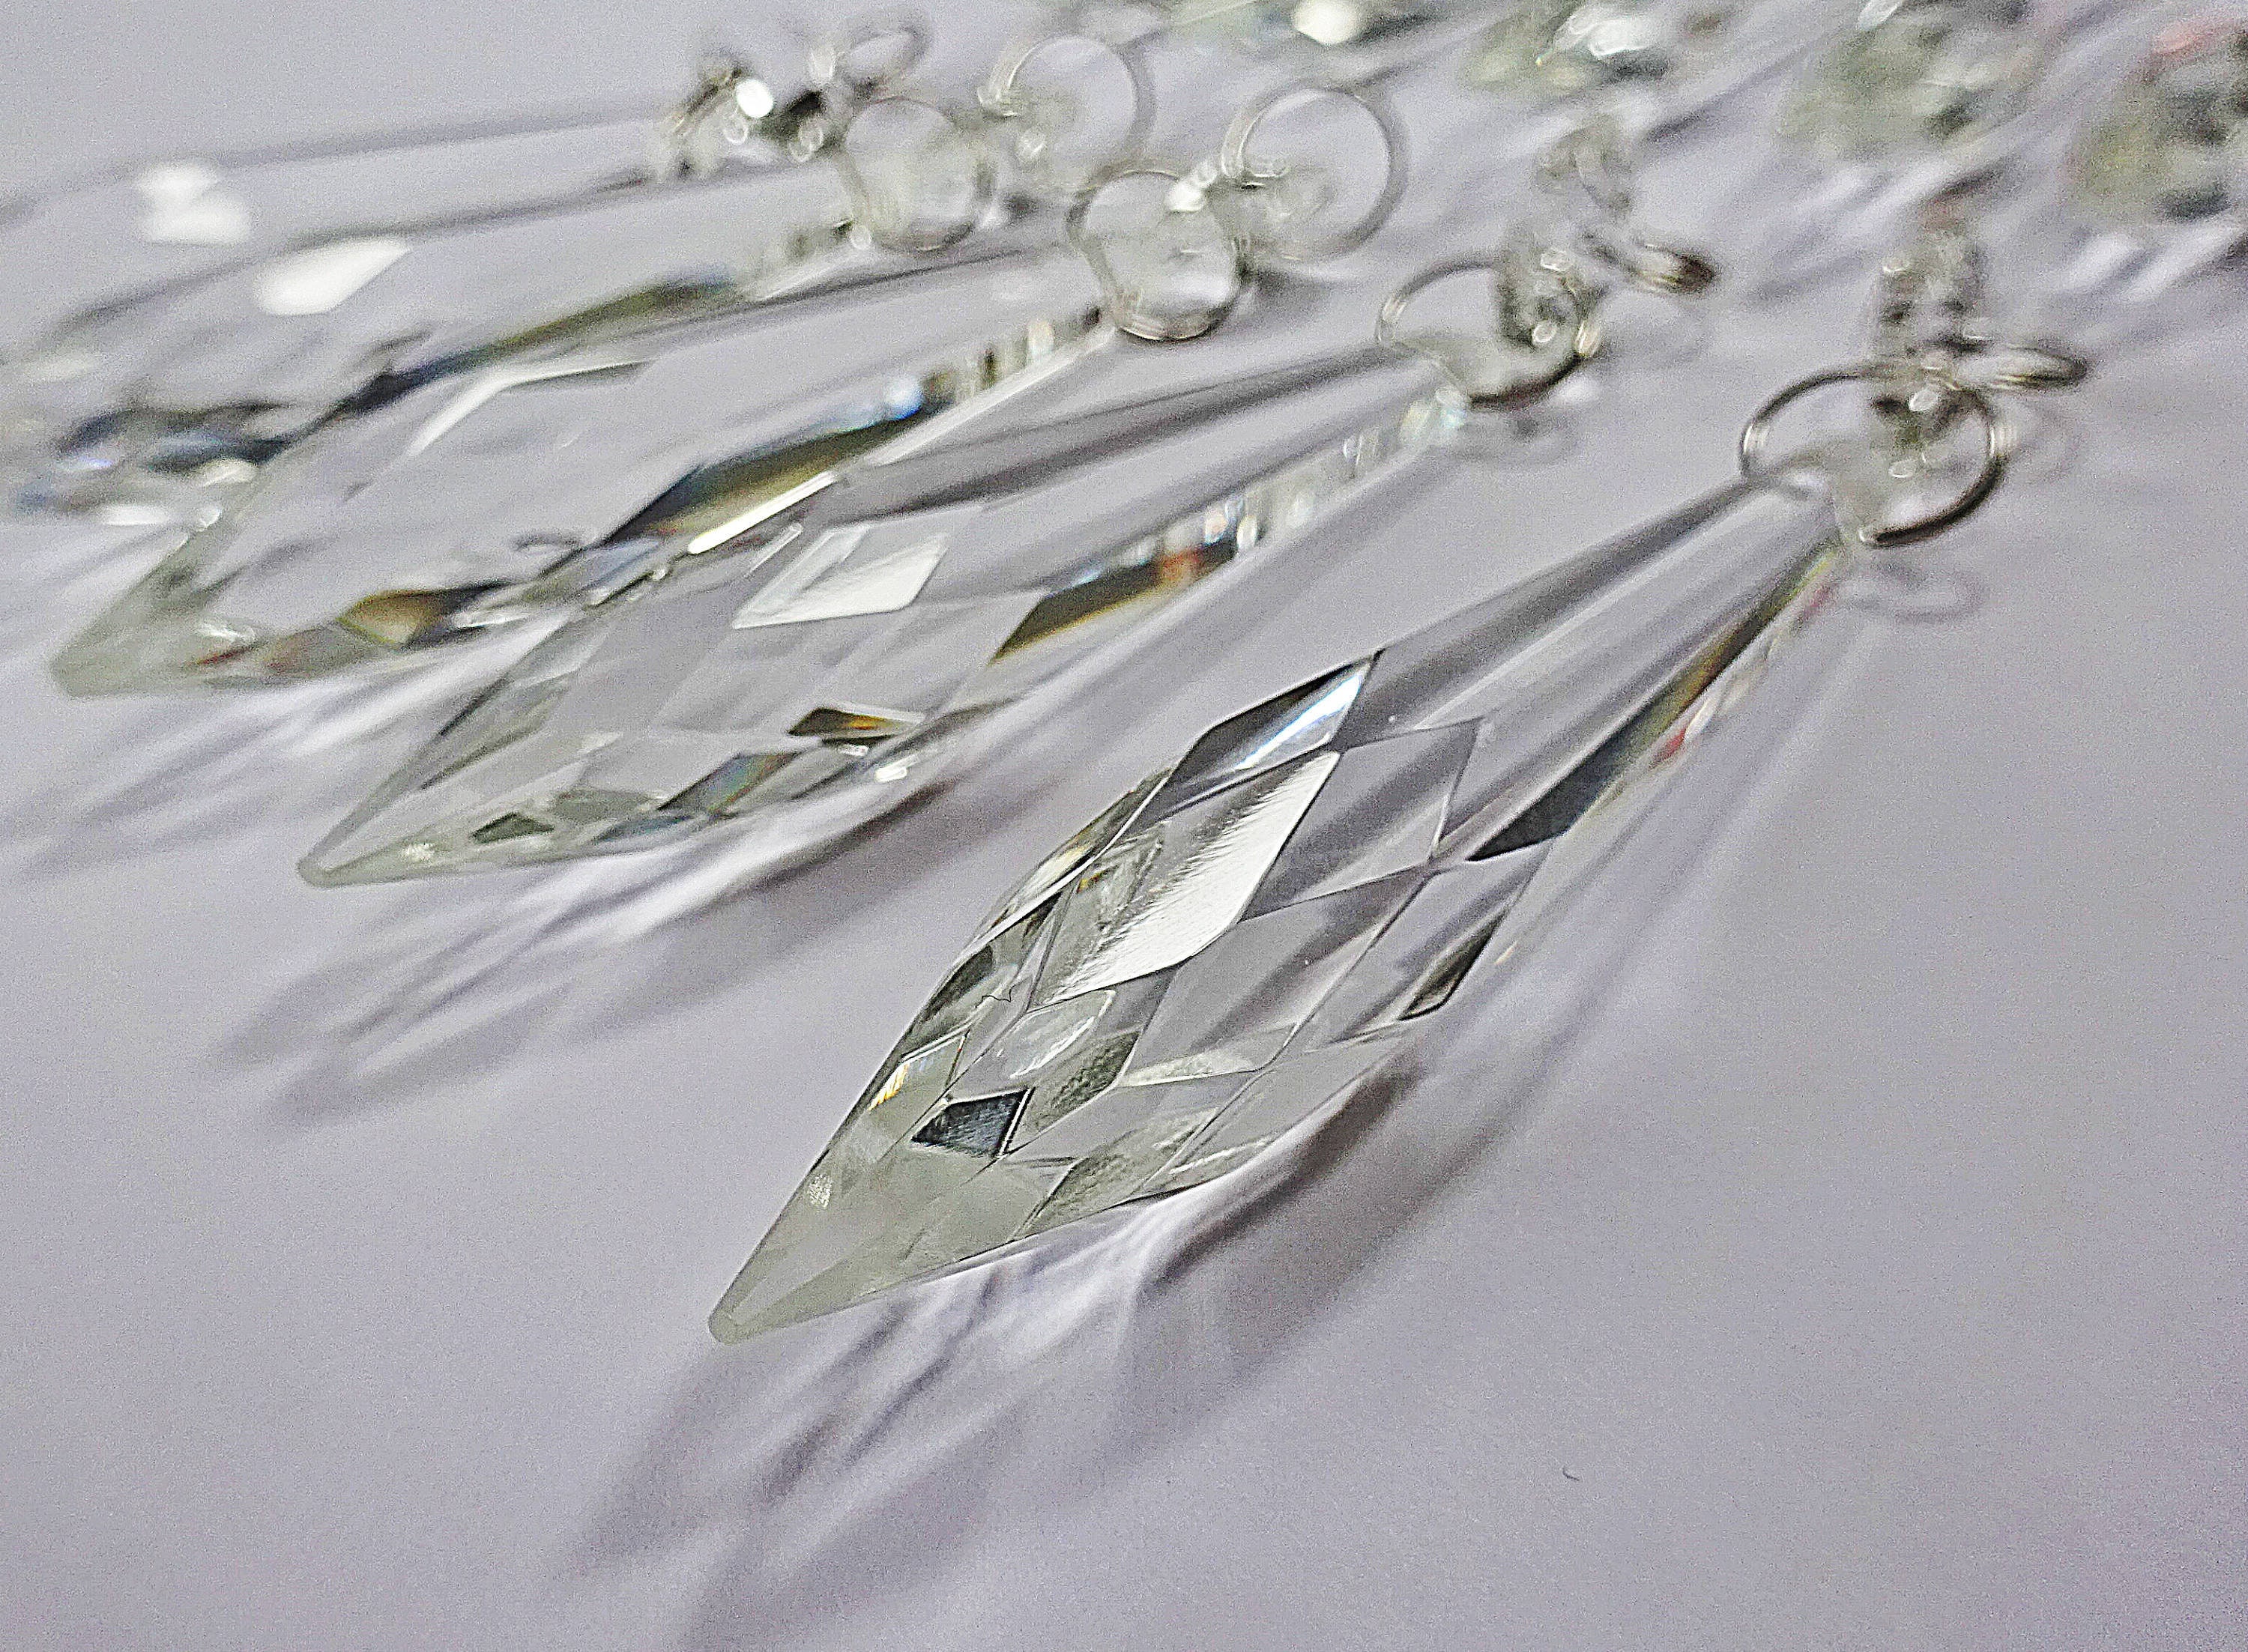 10 CHANDELIER LIGHT PARTS GLASS CRYSTALS RETRO ICICLE BEADS DROPS PRISM DROPLETS 